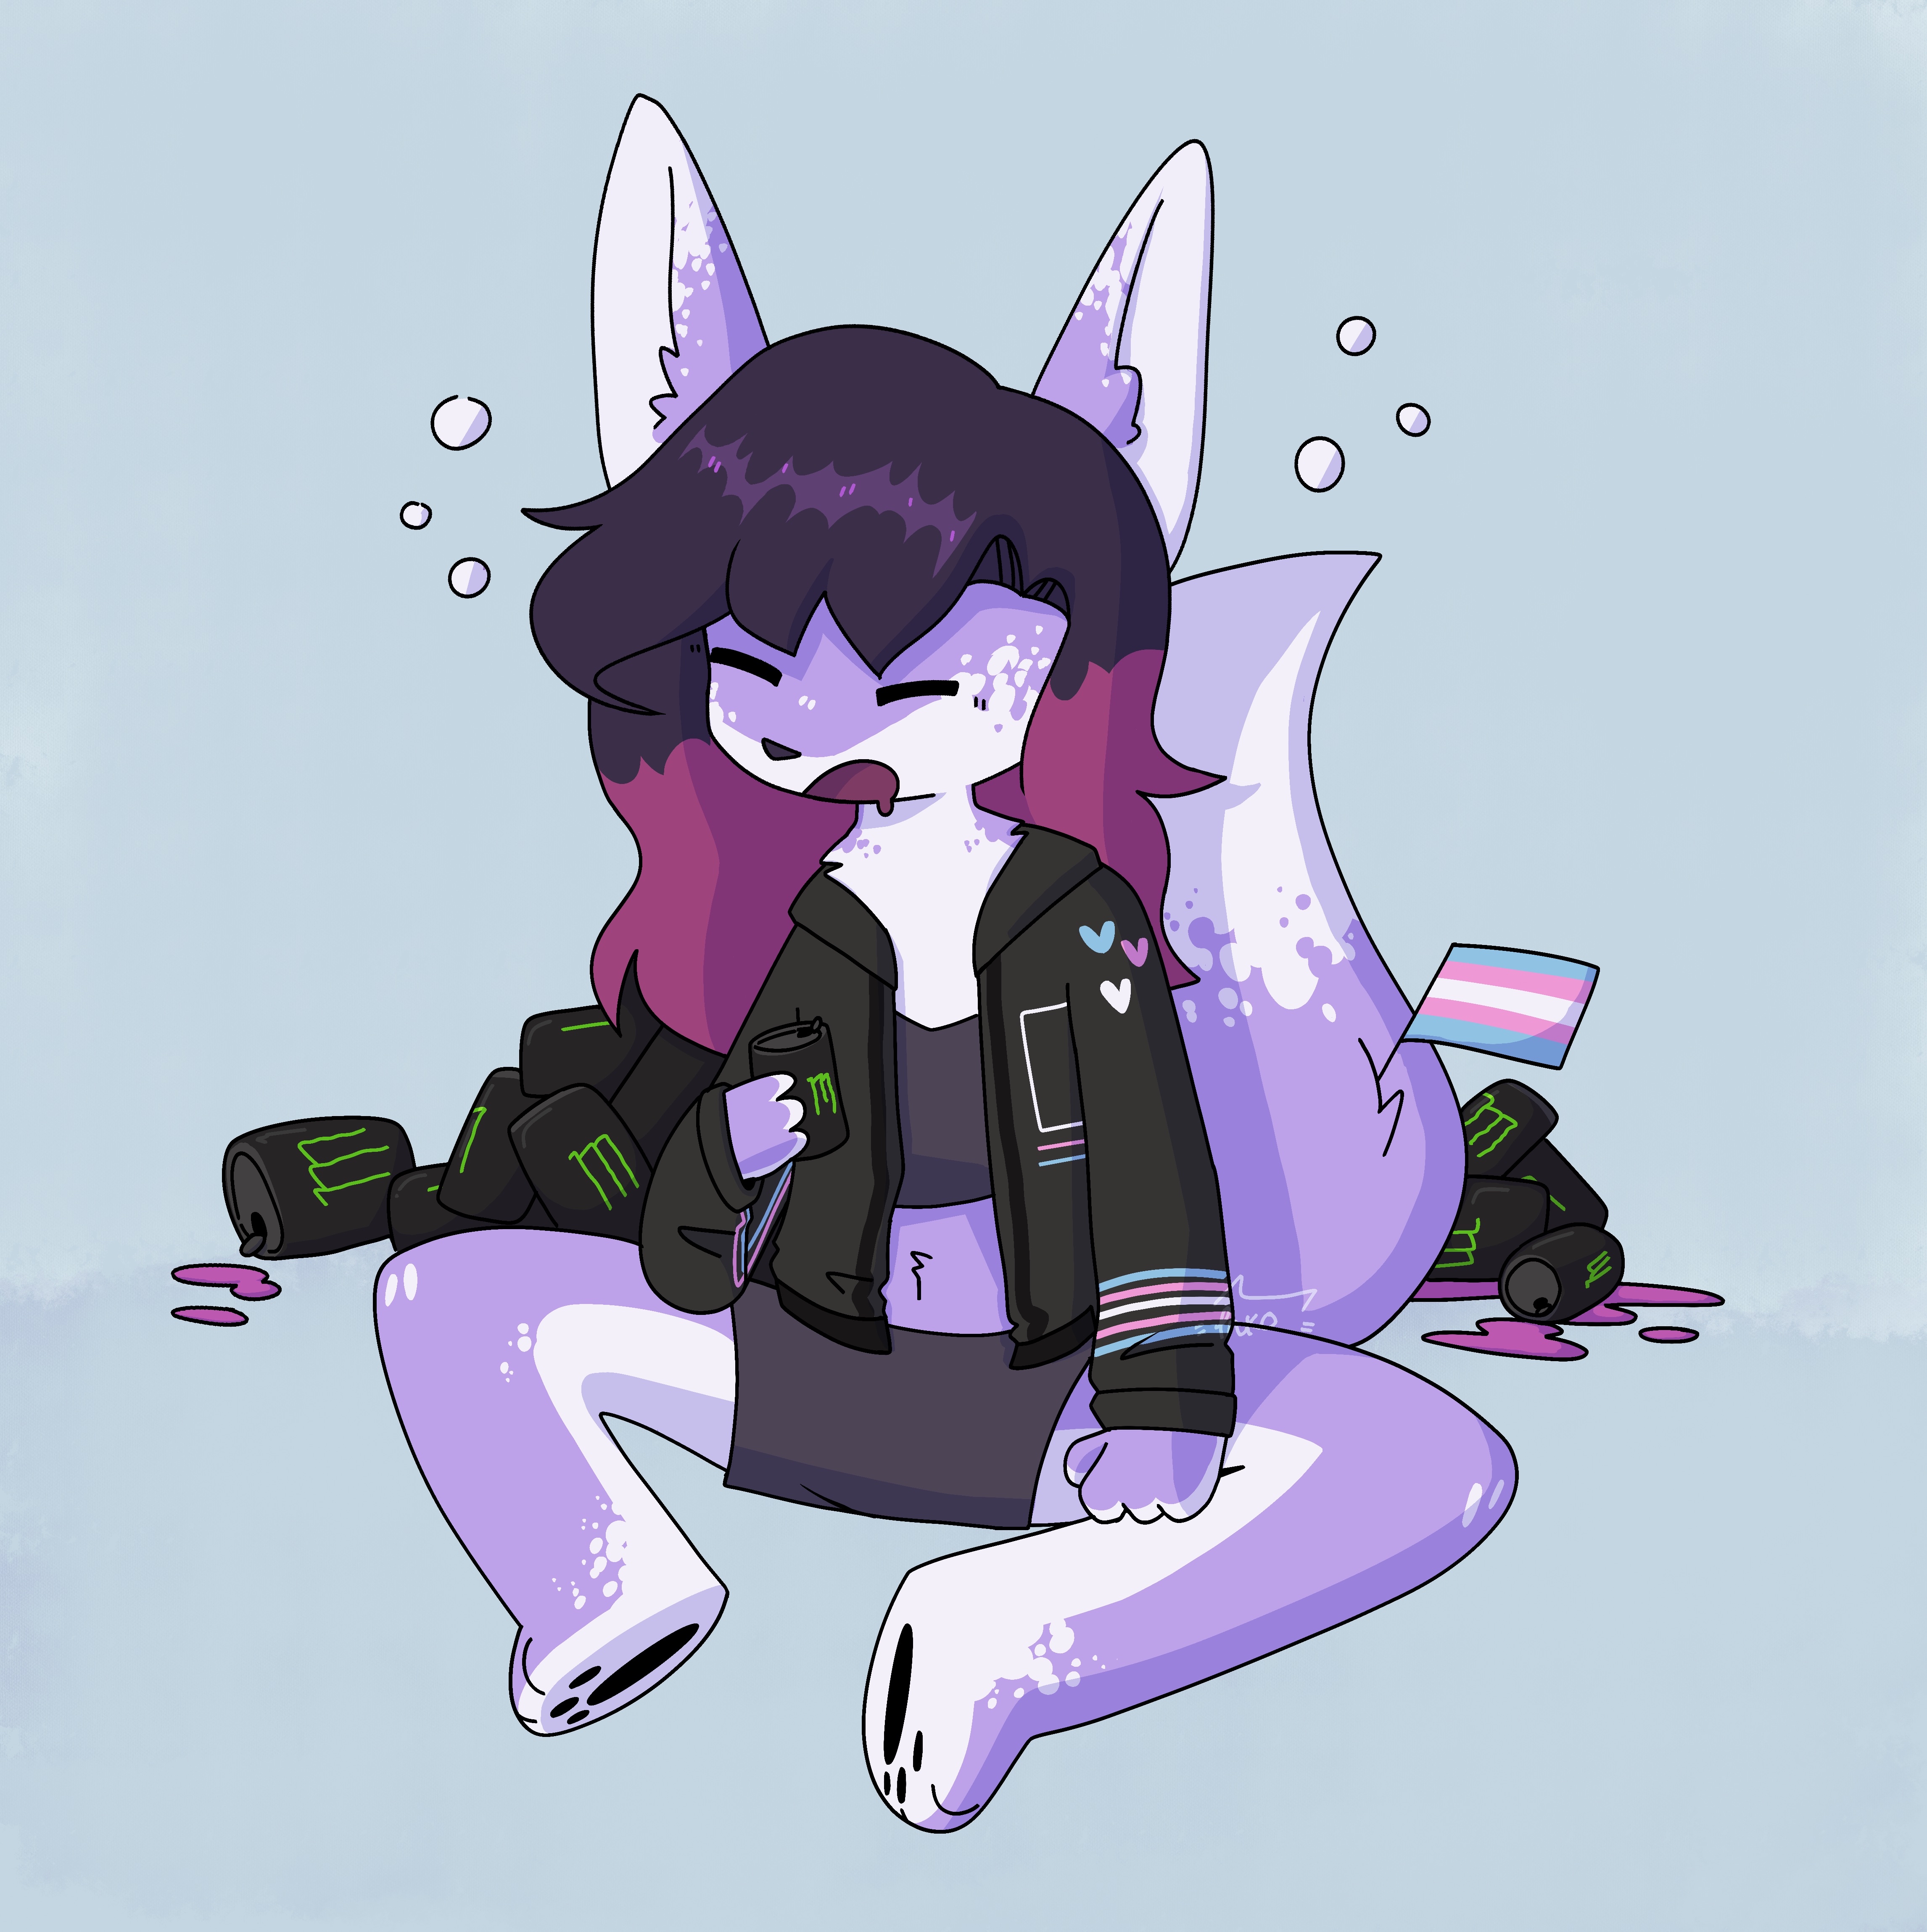 A purple humanoid fox fursona, with white accents. She is wearing a black hoodie with the hood down and front unzipped, along with a basic bra and shorts. the hoodie has various transgender colored features, including arm stripes and hearts. she has a large poofy tail, with a transgender flag sticking out of it. her eyes are closed, mouth open and drooling. she is holding a can of monster, with many empty and spilling cans behind her